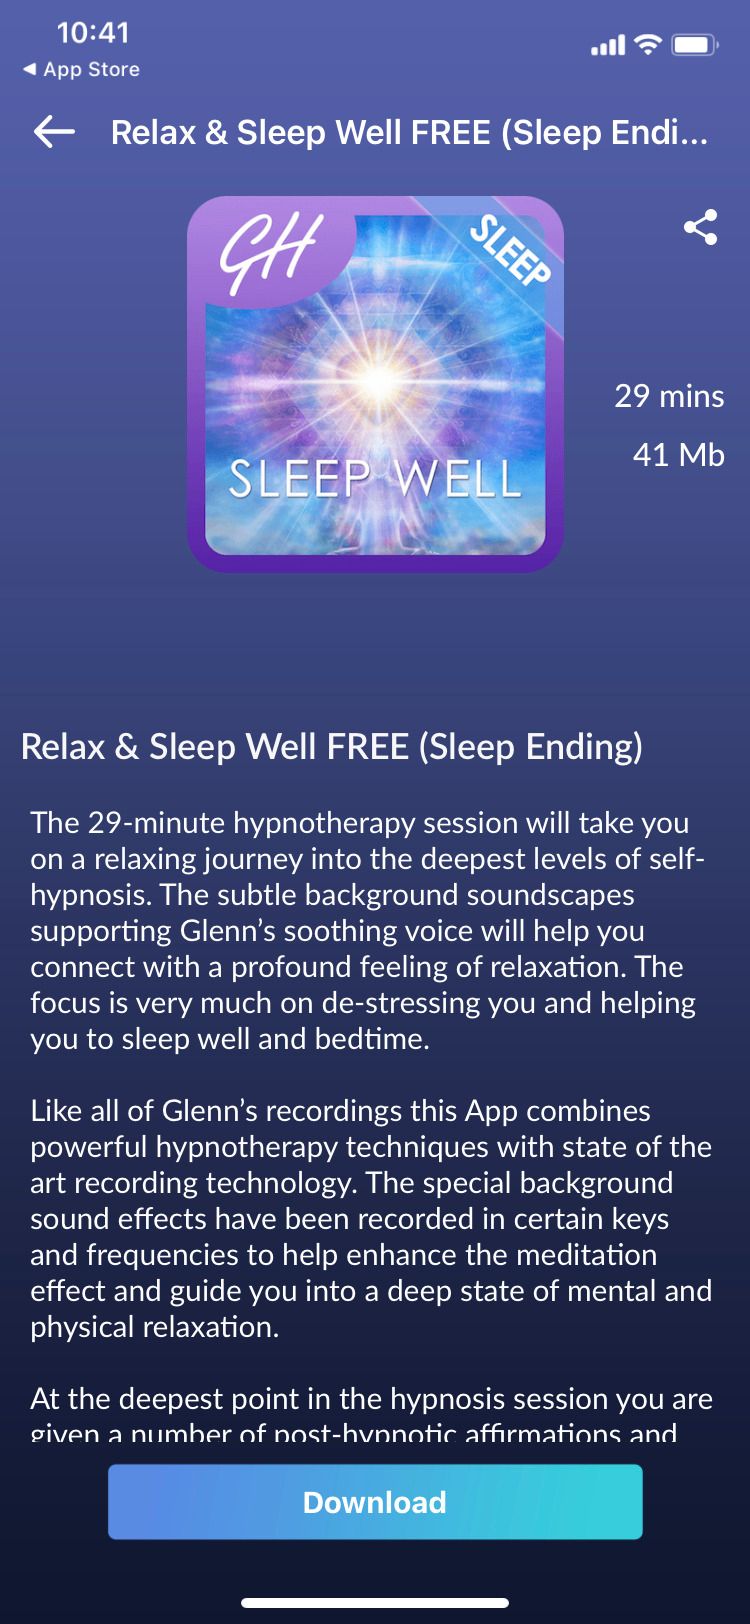 Relax And Sleep Well Hypnosis app free session